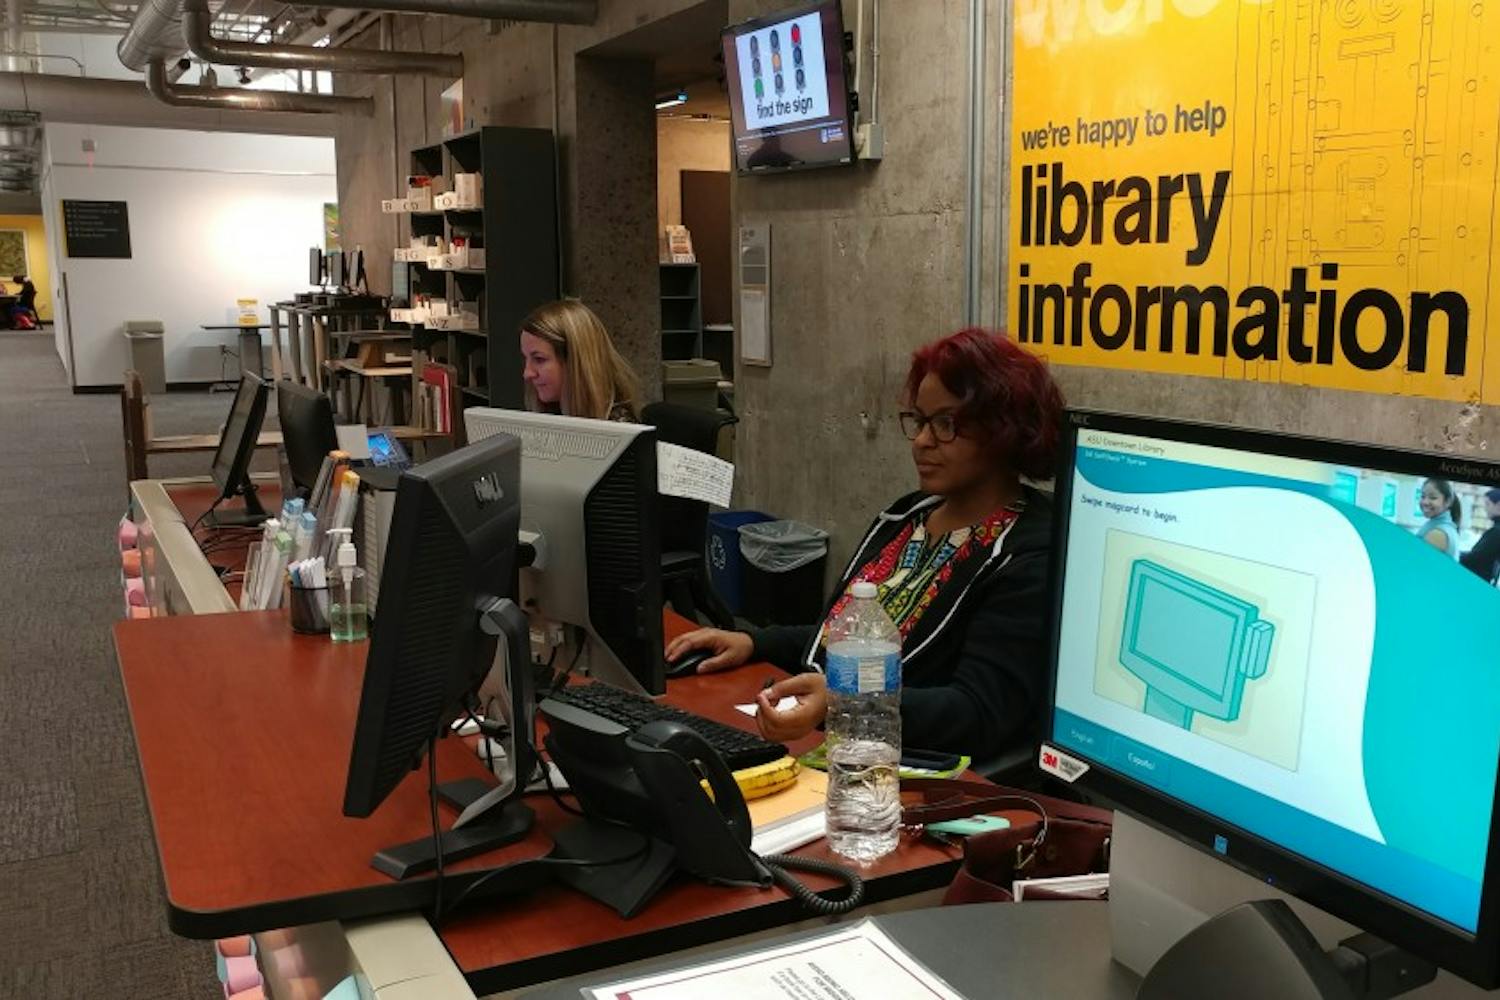 library workers